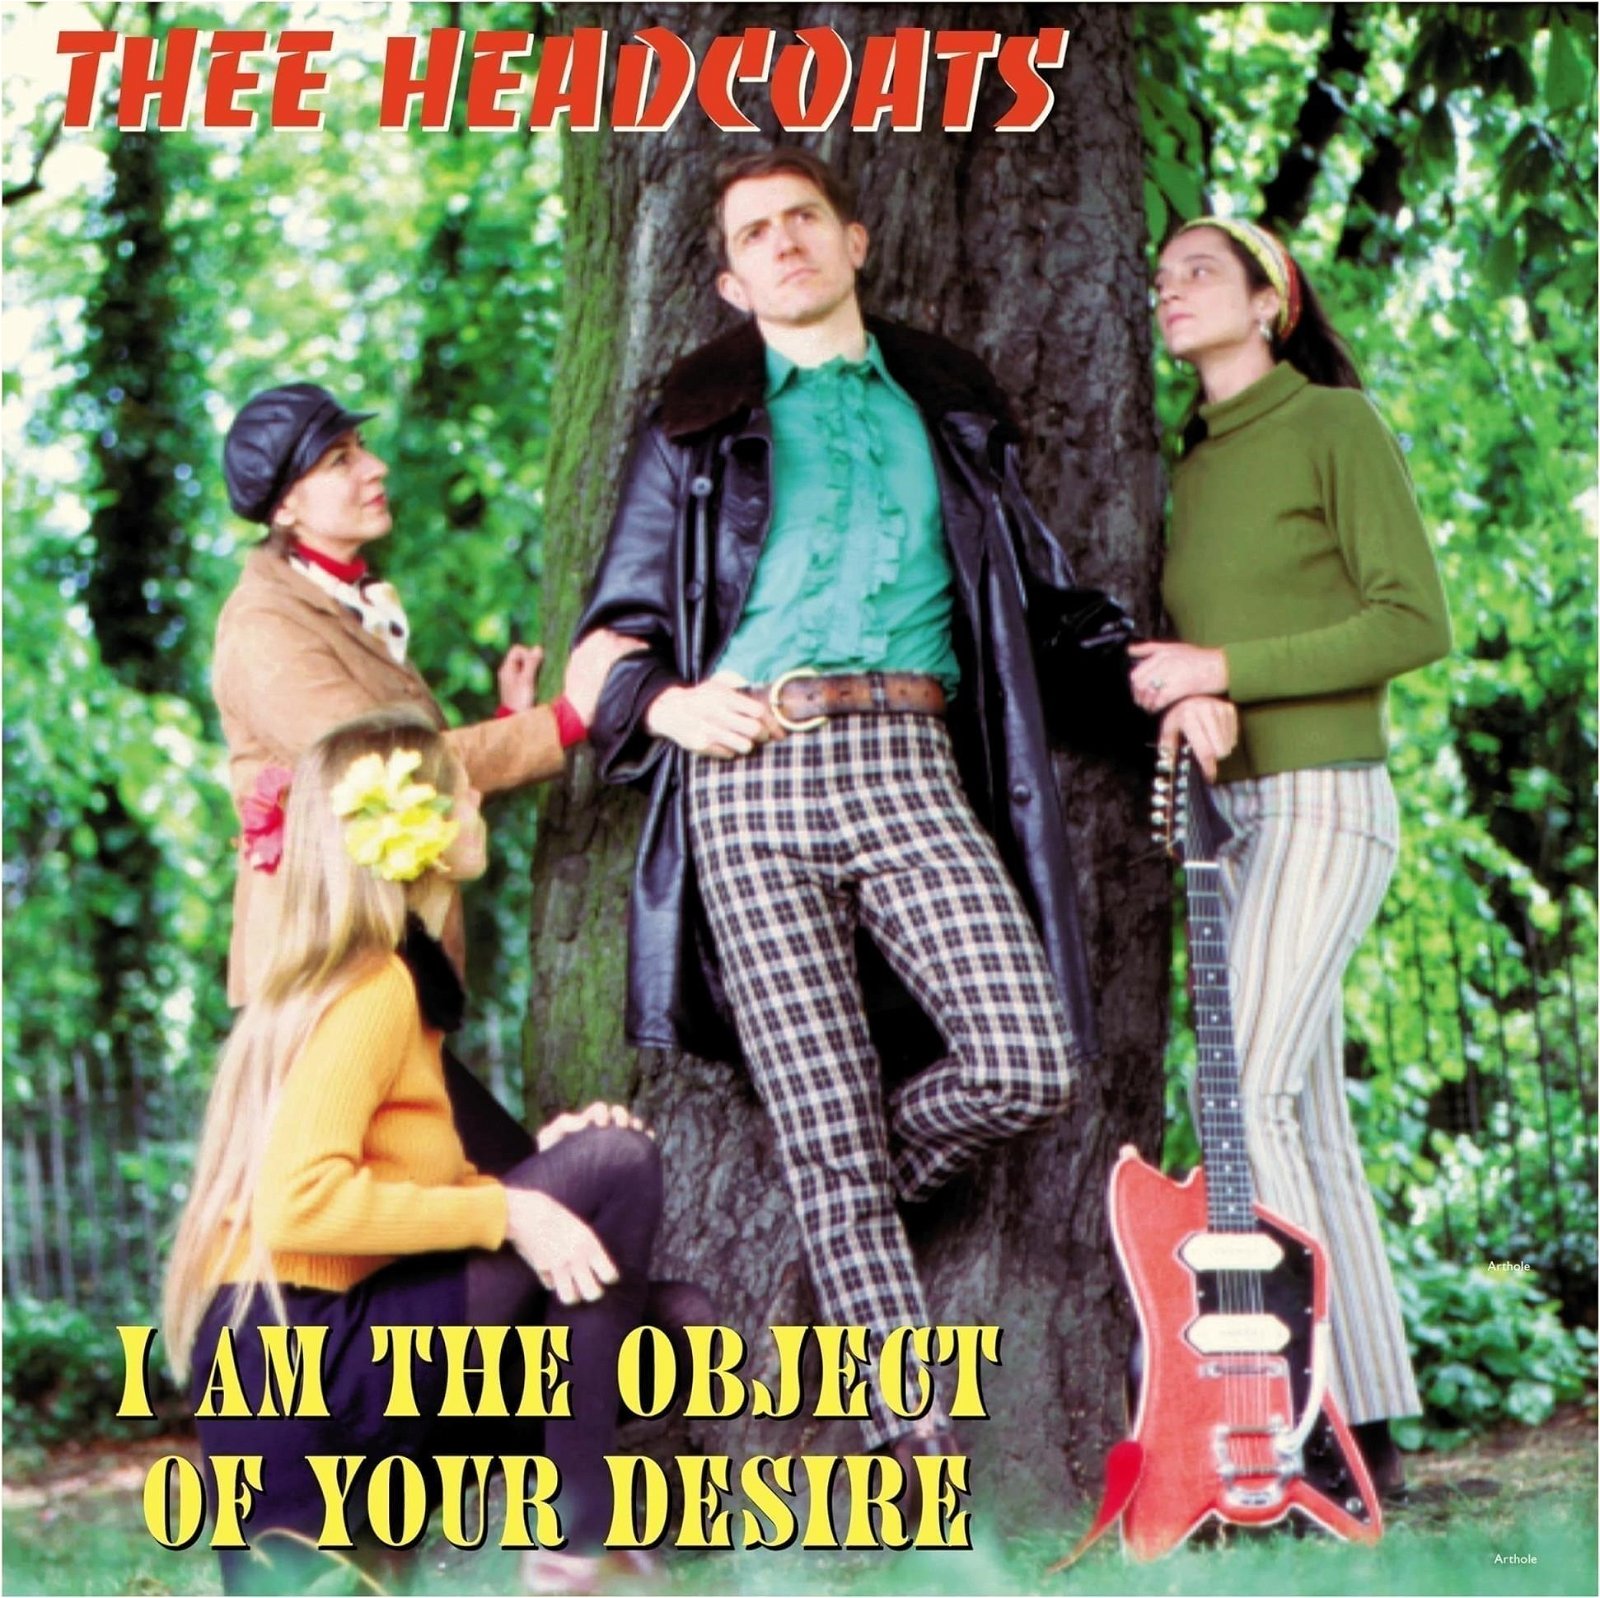 CD Shop - THEE HEADCOATS I AM THE OBJECT OF YOUR DESIRE